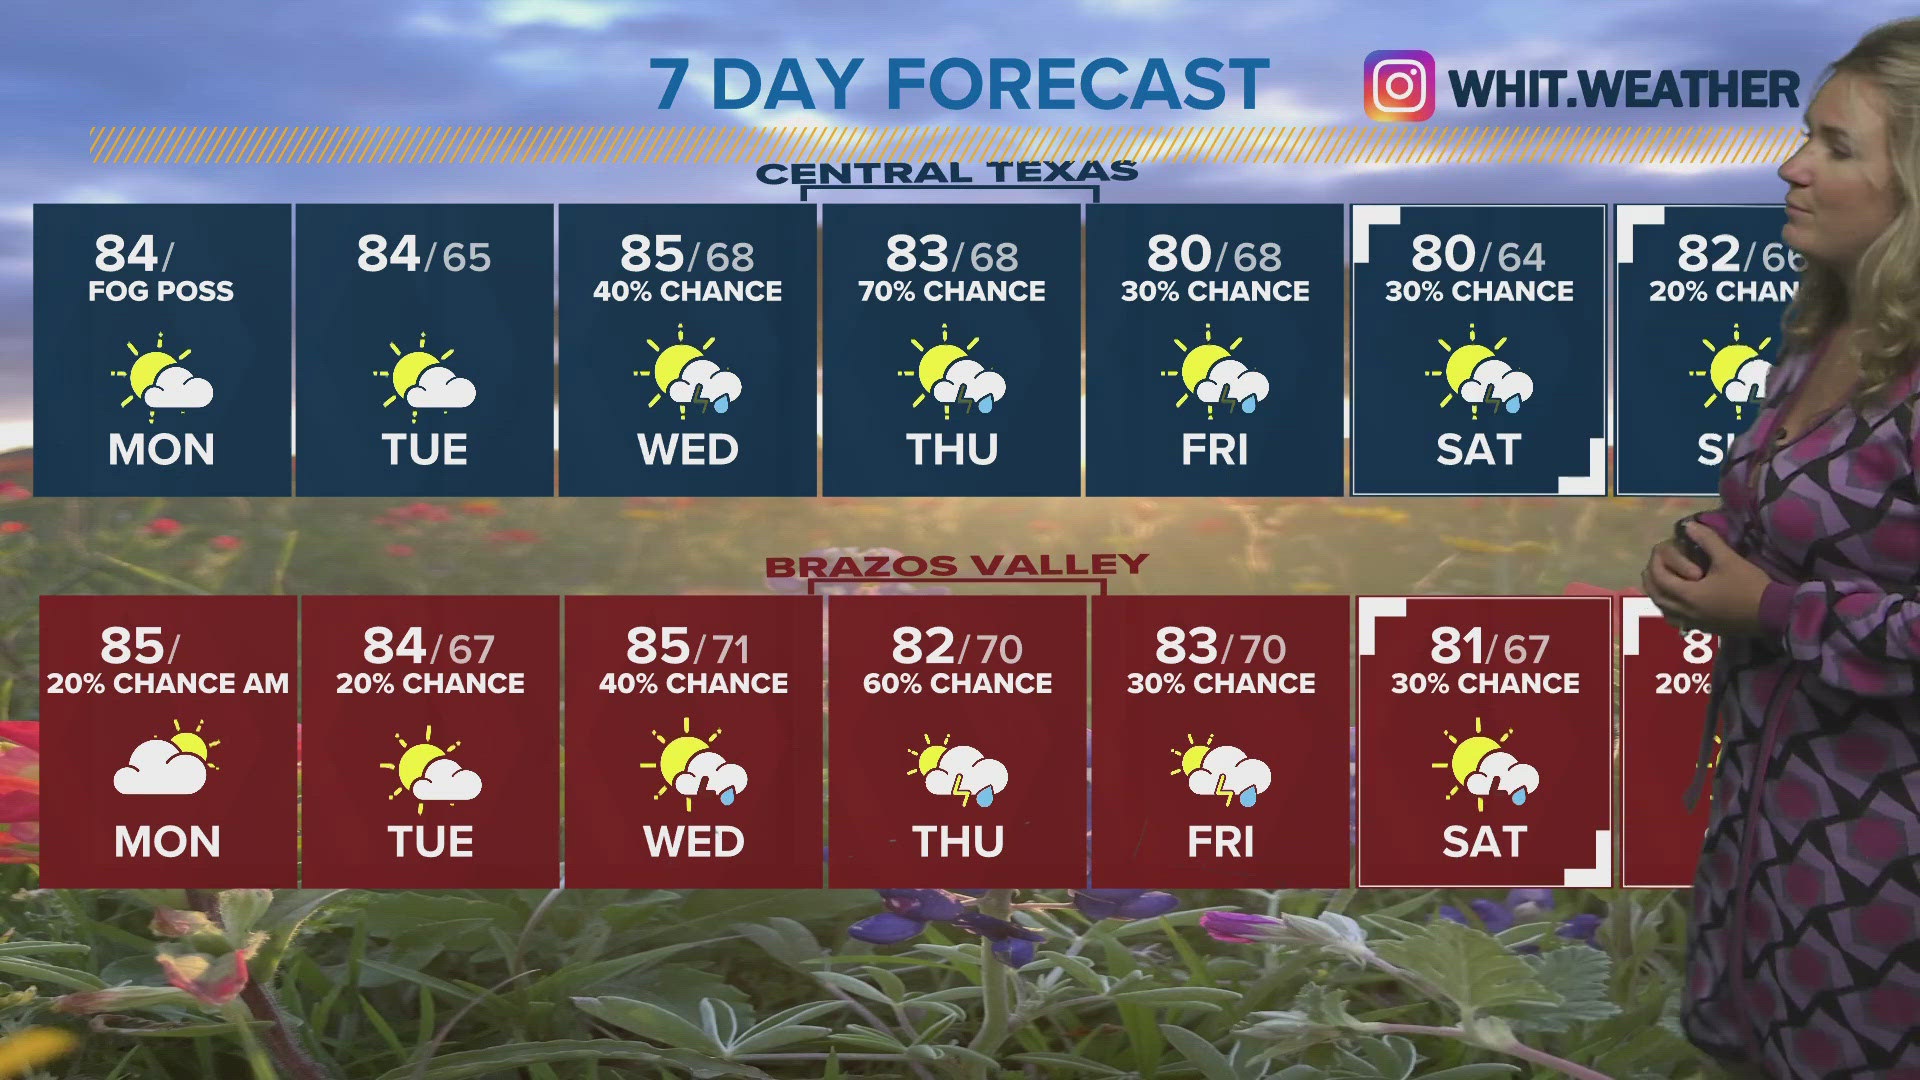 We will dry out briefly ahead of new chances for rain and storms this week.